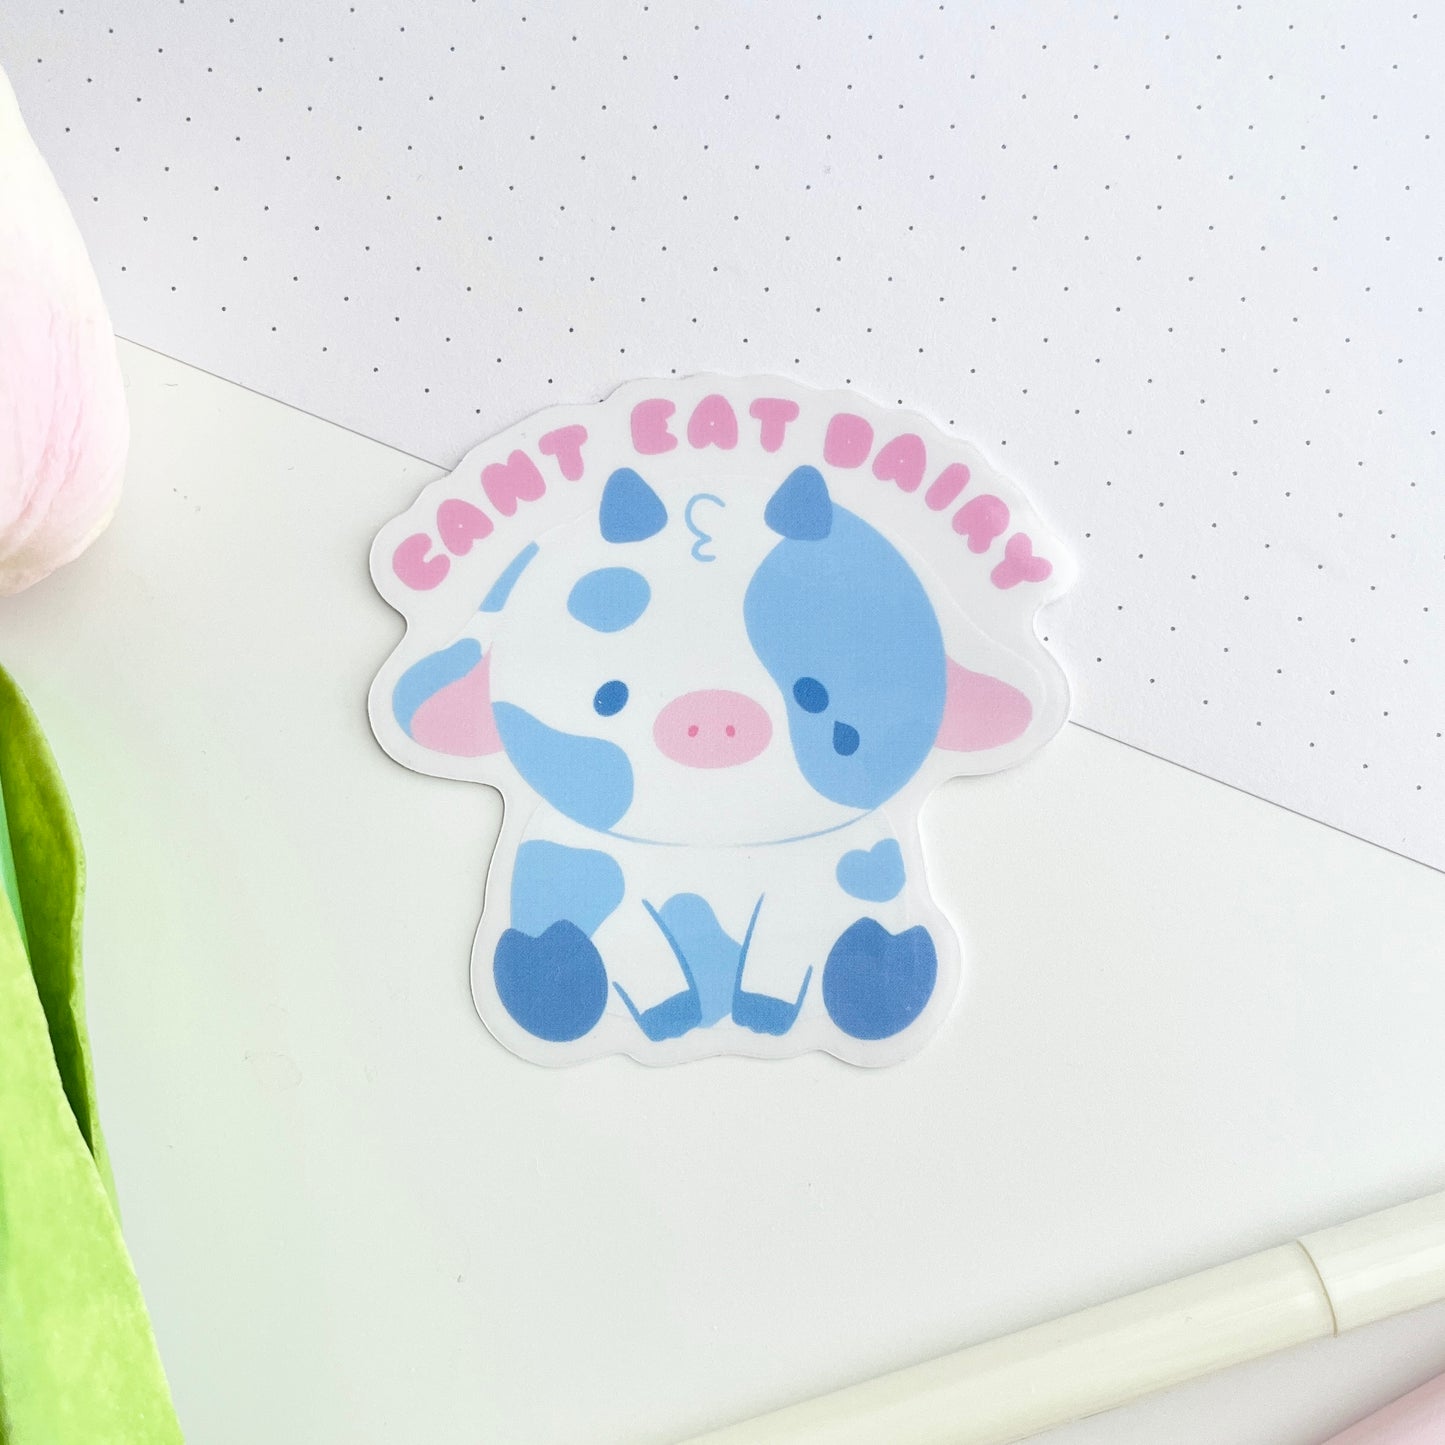 Can't Eat Dairy Clear Vinyl Sticker